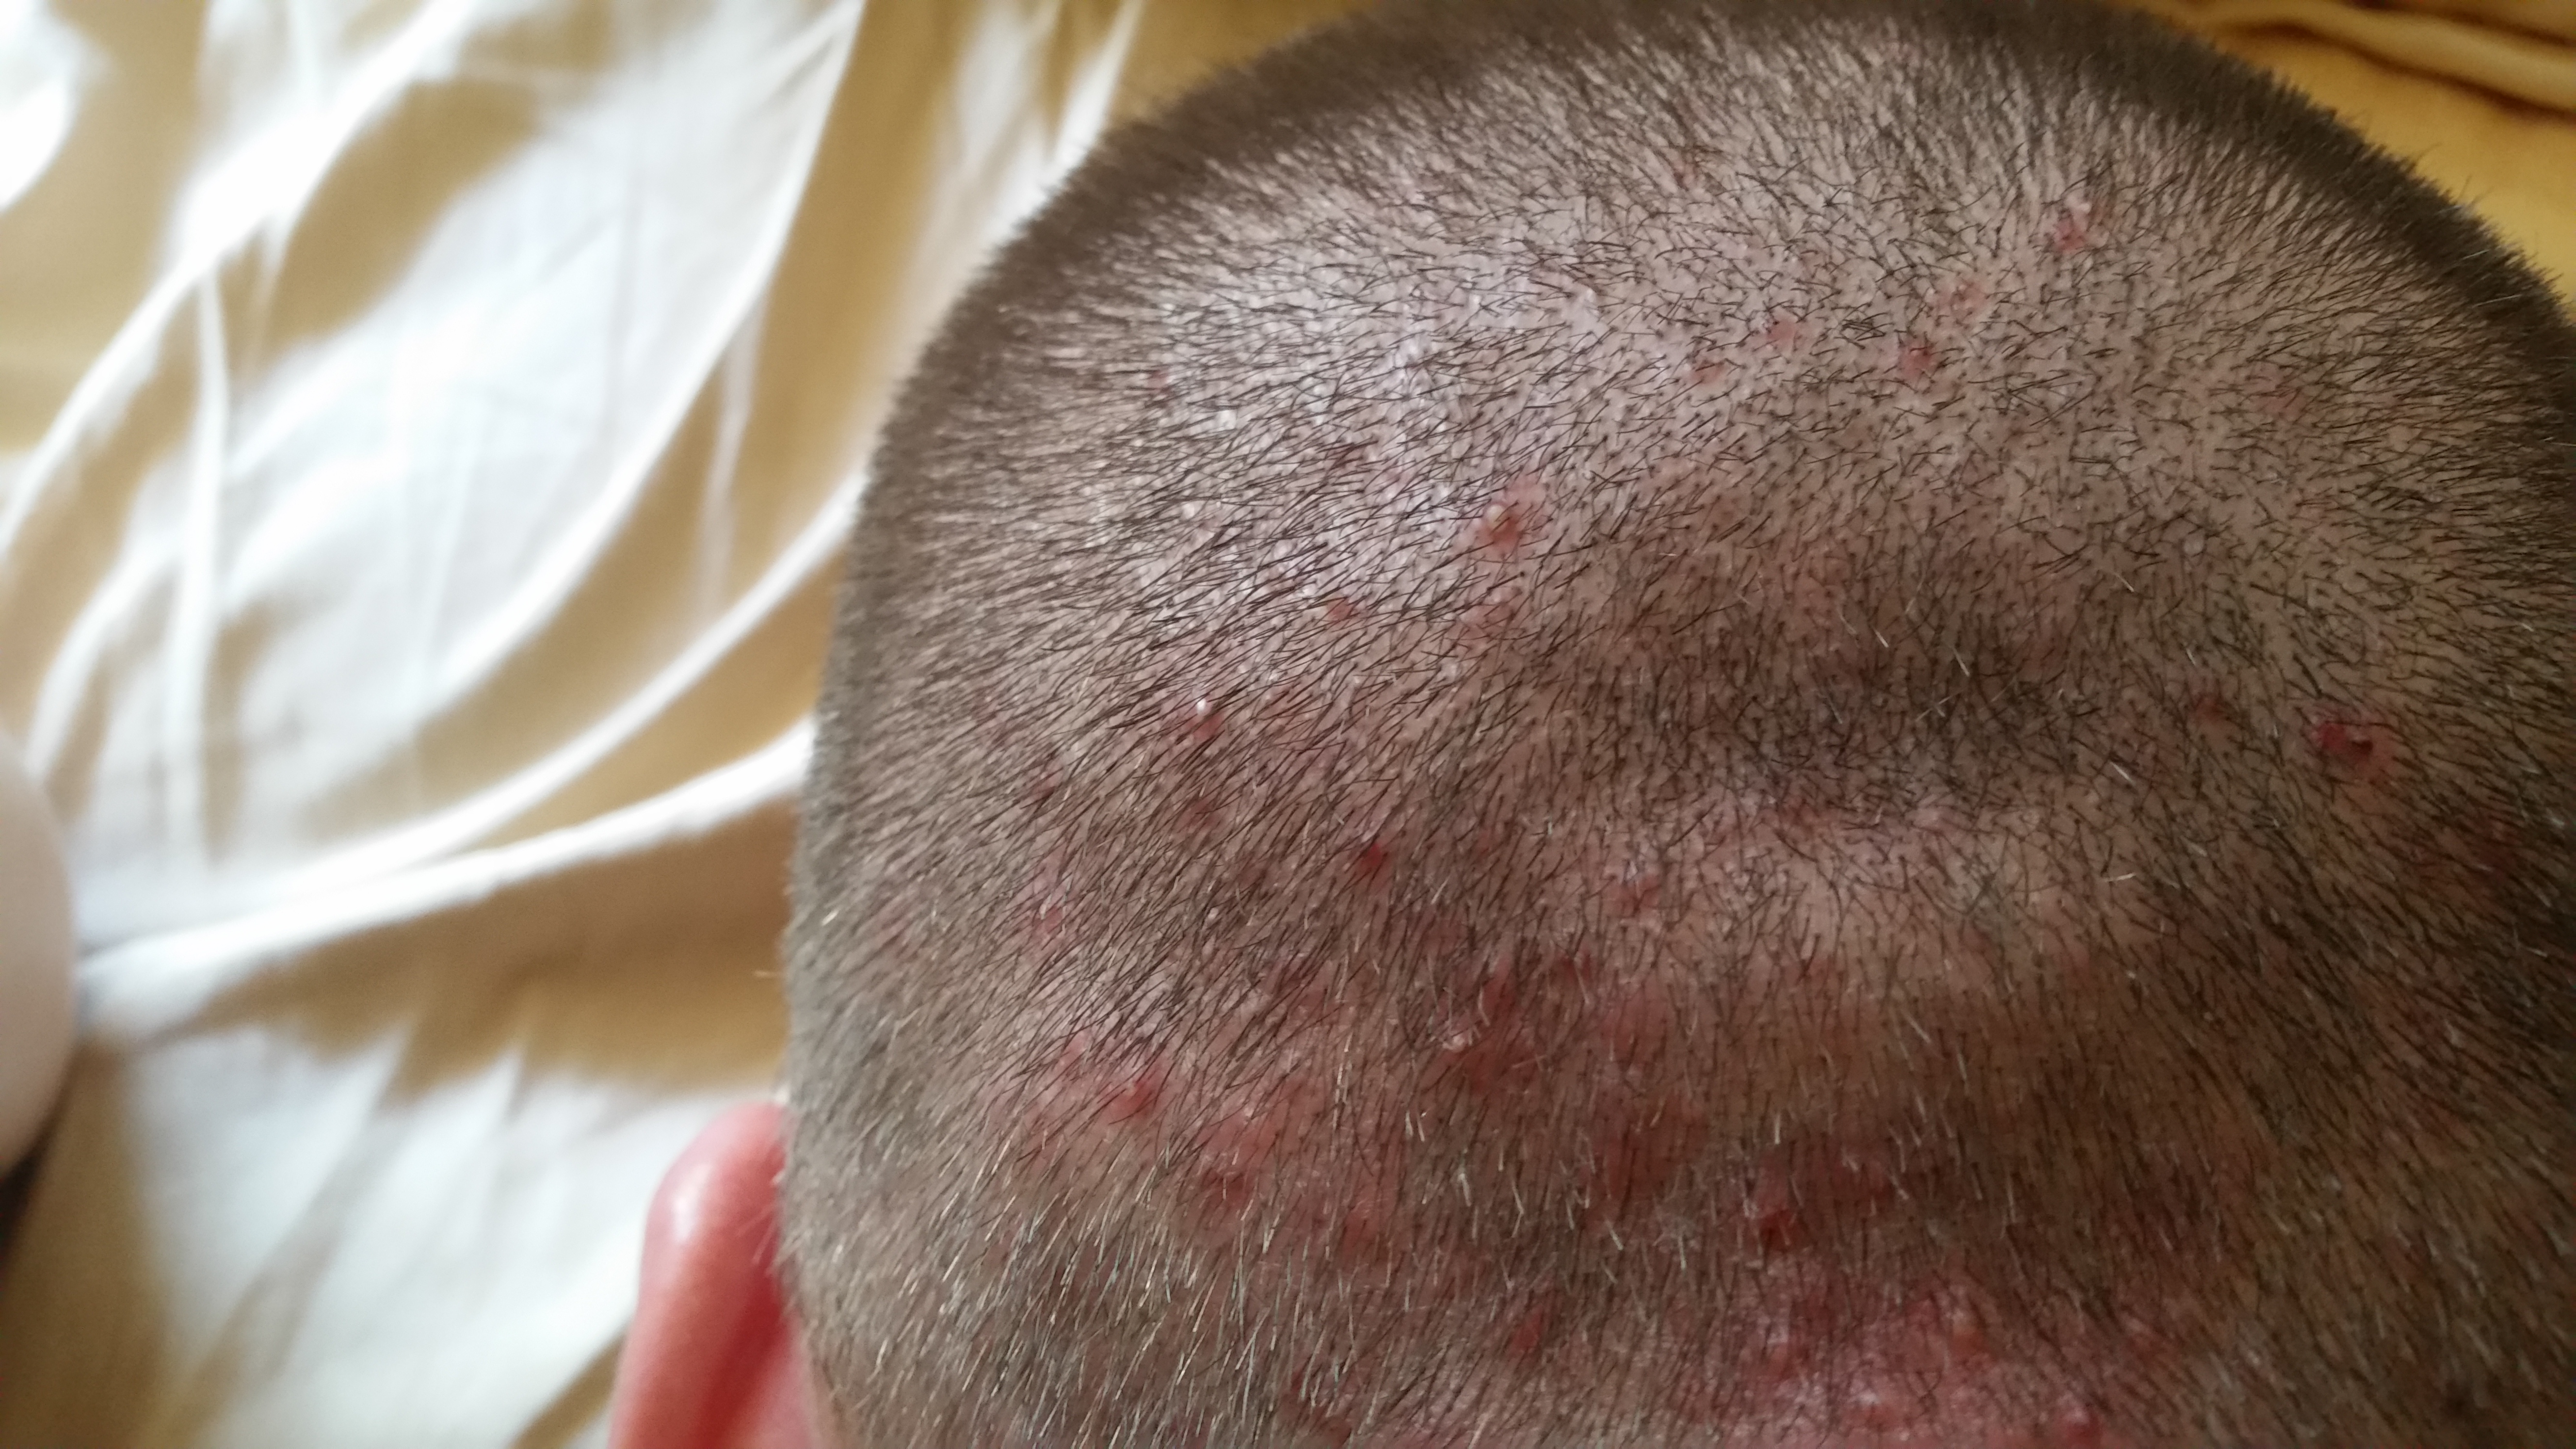 Scalp Acnefolliculitis Pictures General Acne Discussion